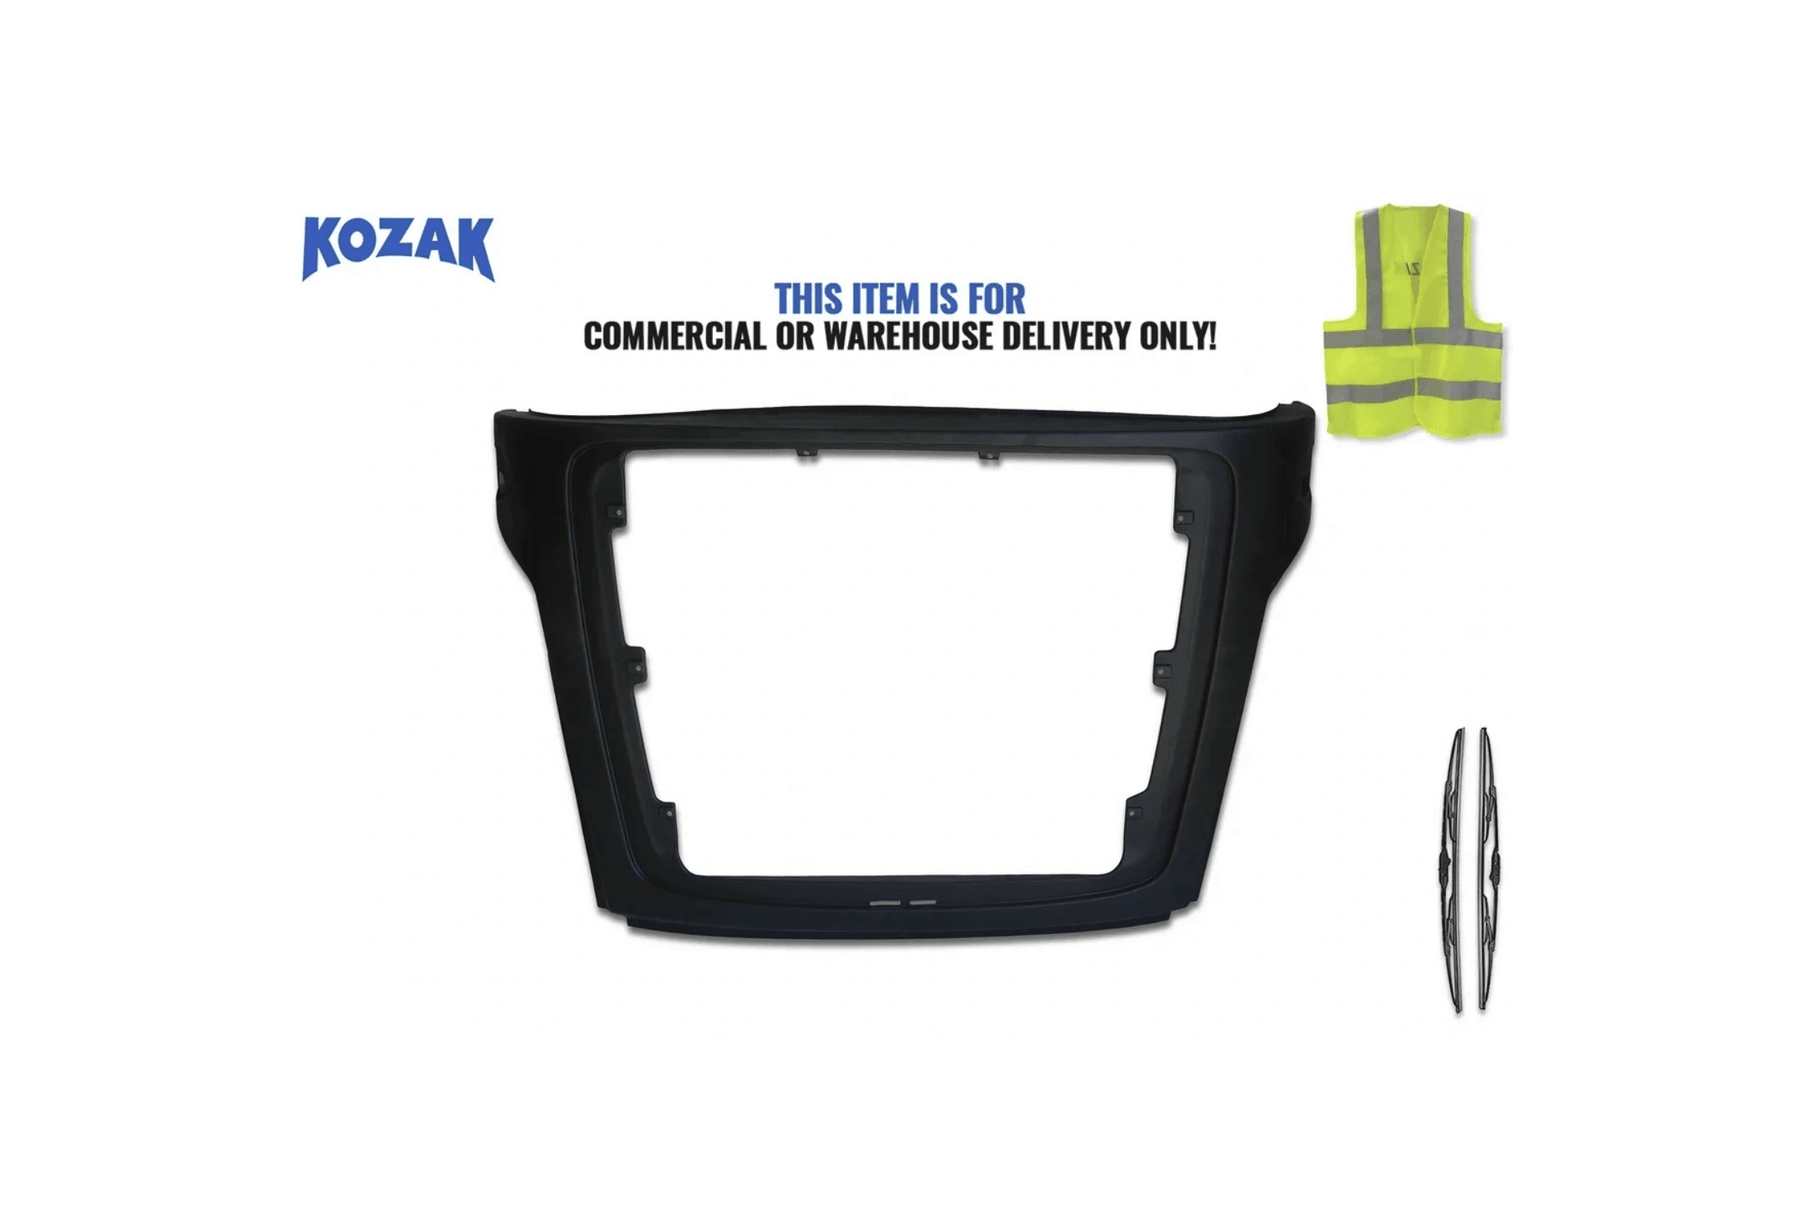 KOZAK Grille Shroud Carrier Reefer Vector X2 1800/2100 / 2100A / 2100R / 2500A / 2500R X4 7500/6600 MT 58-04737-00 PLUS Kozak Vest and 2x 22 inch Windshield Wipers